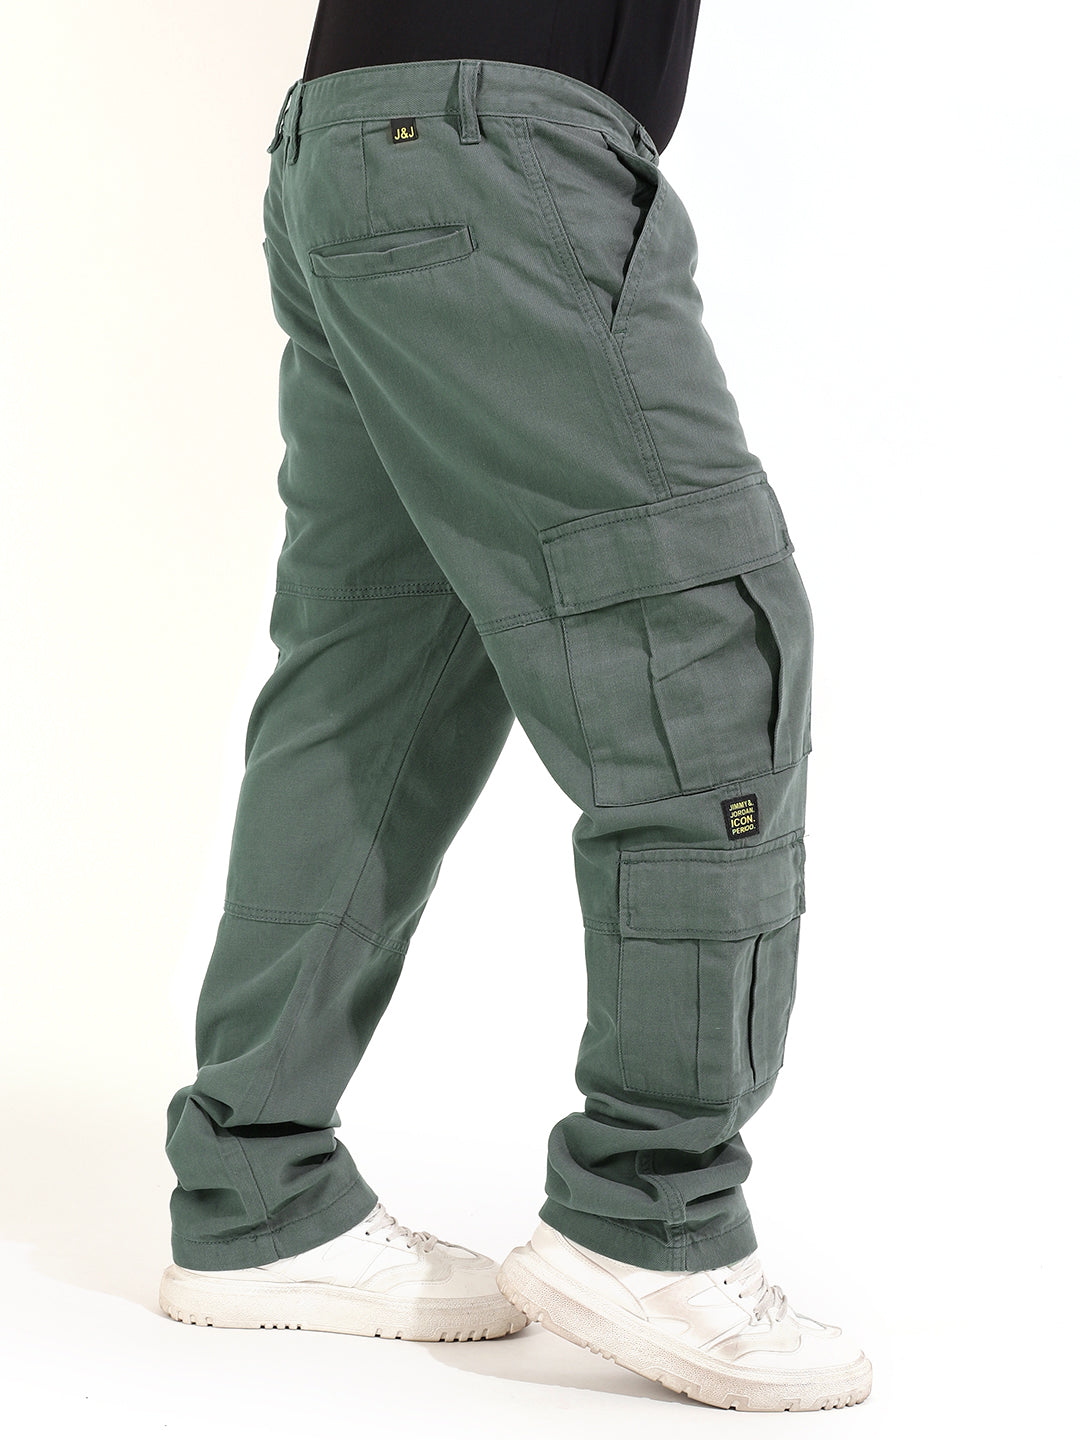 Mens NEW Lightweight Cargo Pants Relaxed Fit Outdoor 6 Pockets Sizes 30 to  44 | eBay